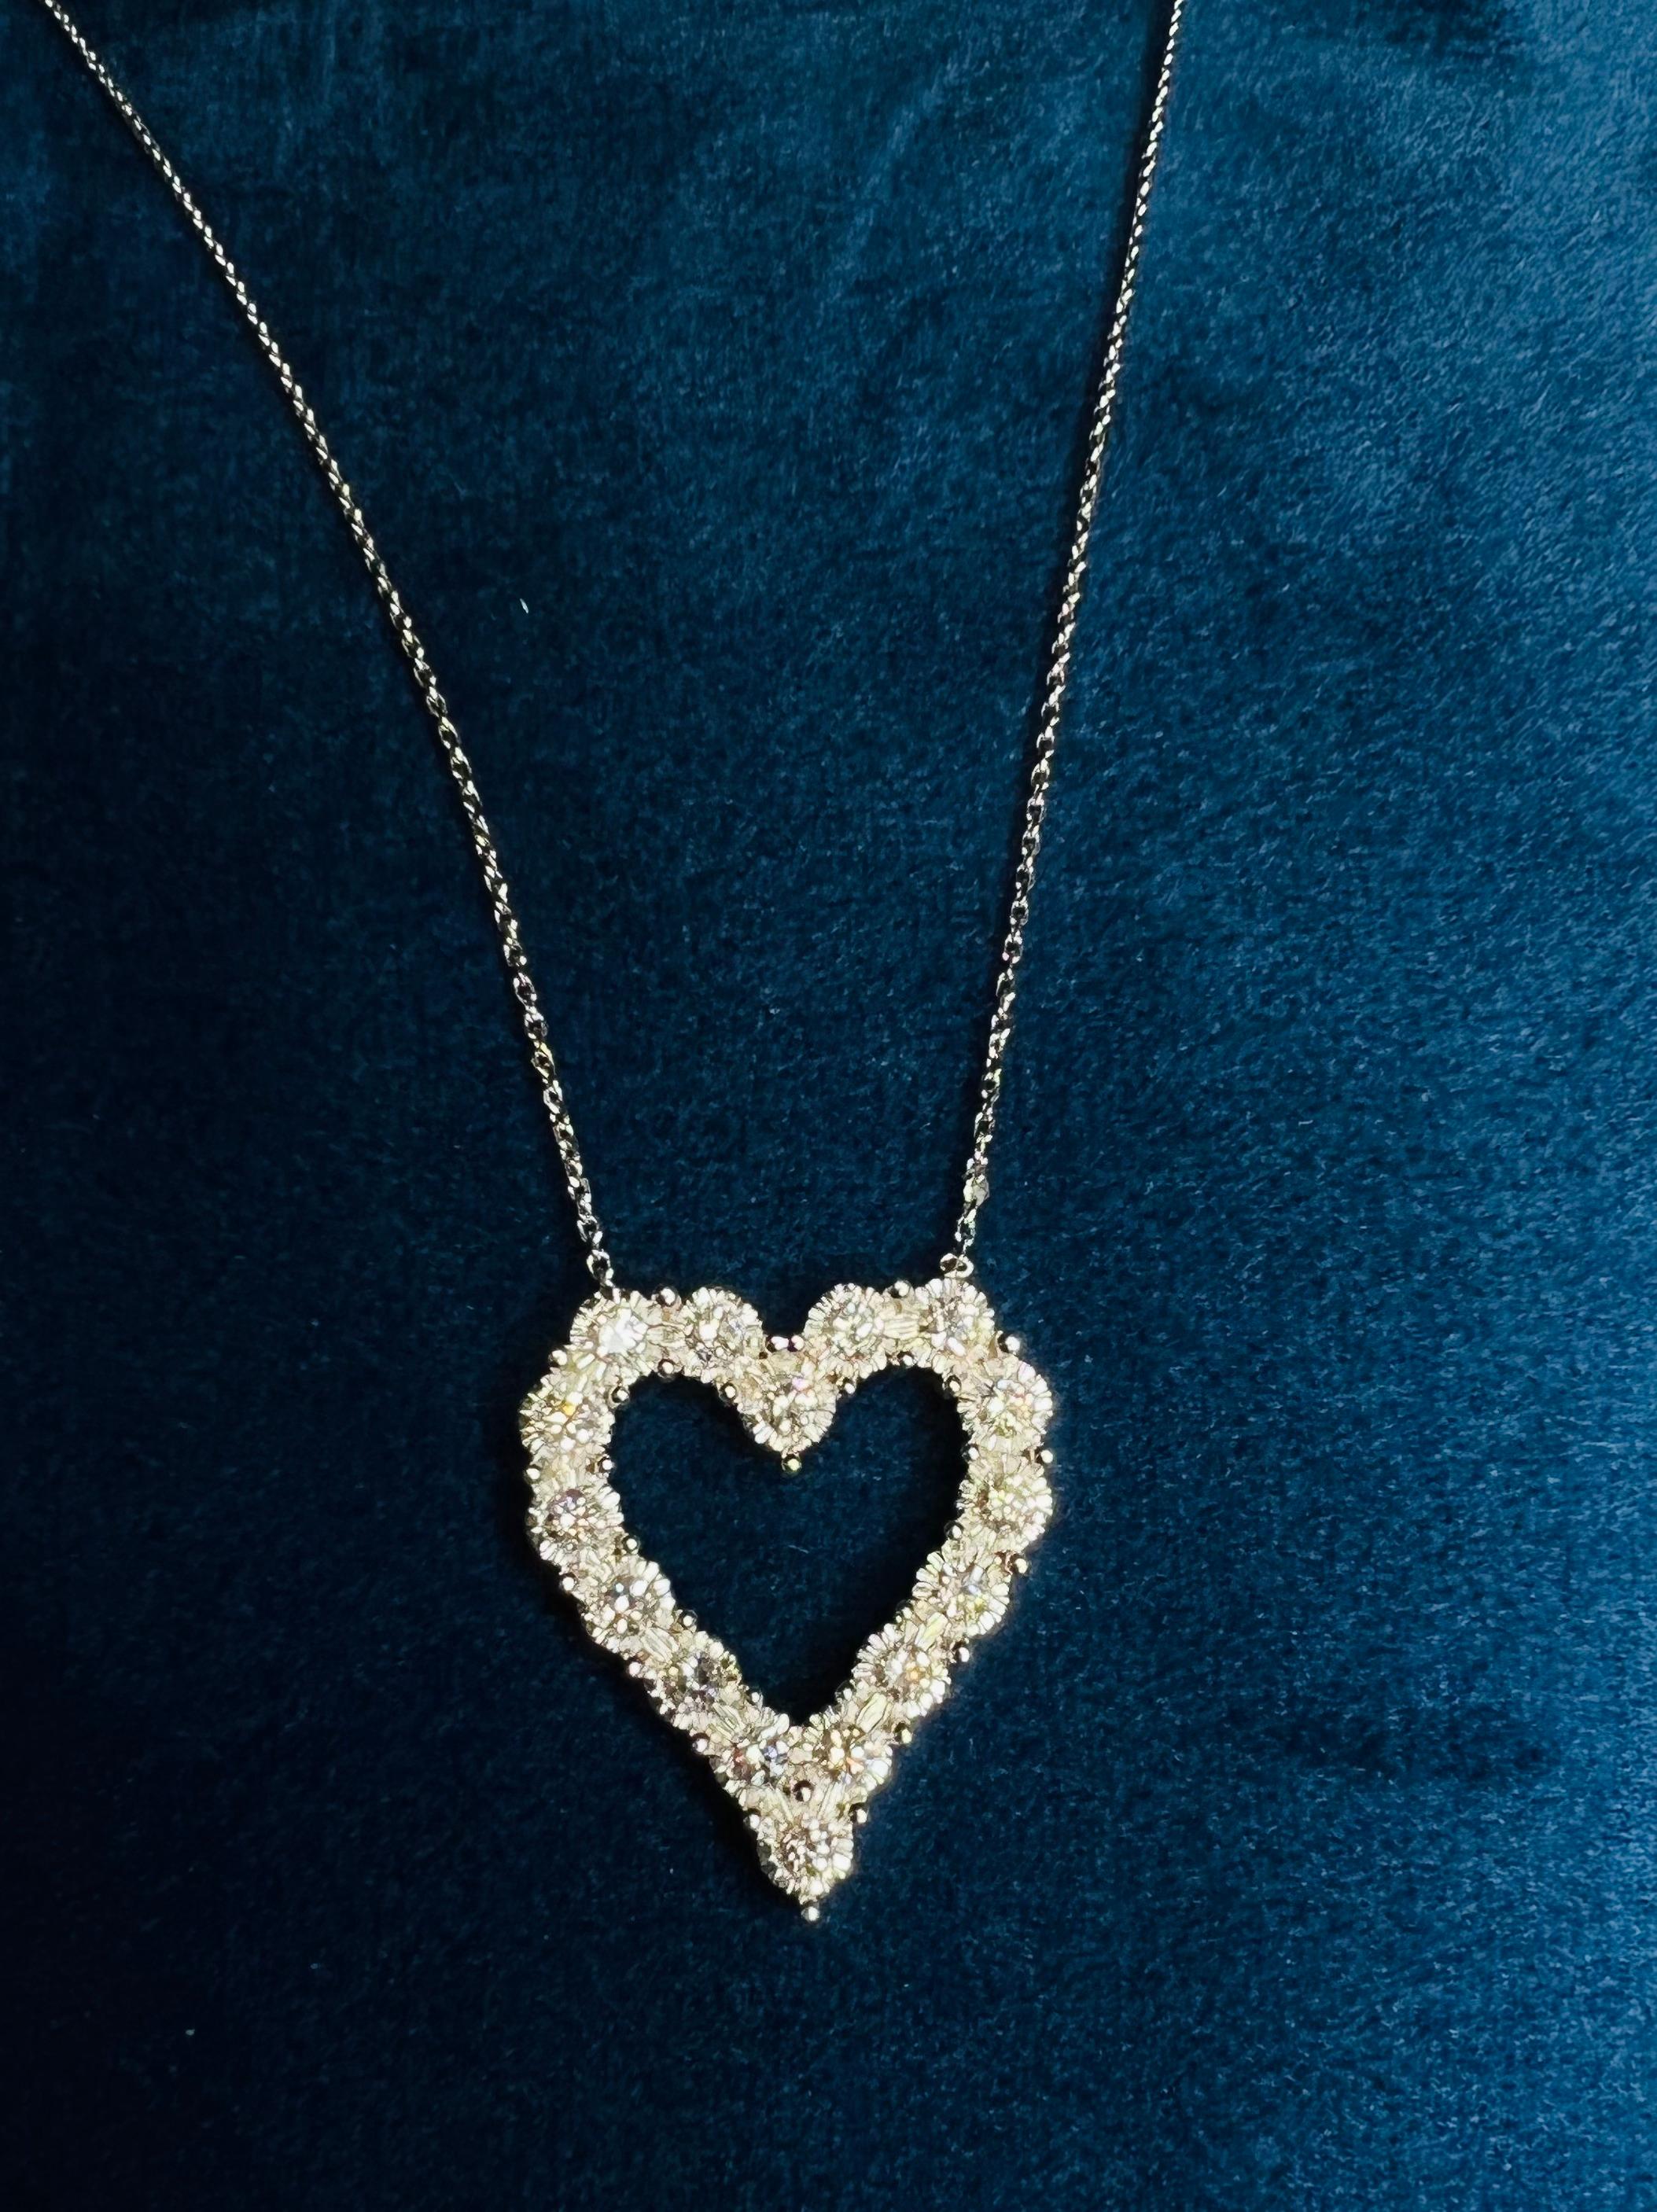 16 Inches 14k White Gold 0.75 Carat Round Diamonds Heart Necklace In New Condition For Sale In Los Angeles, CA